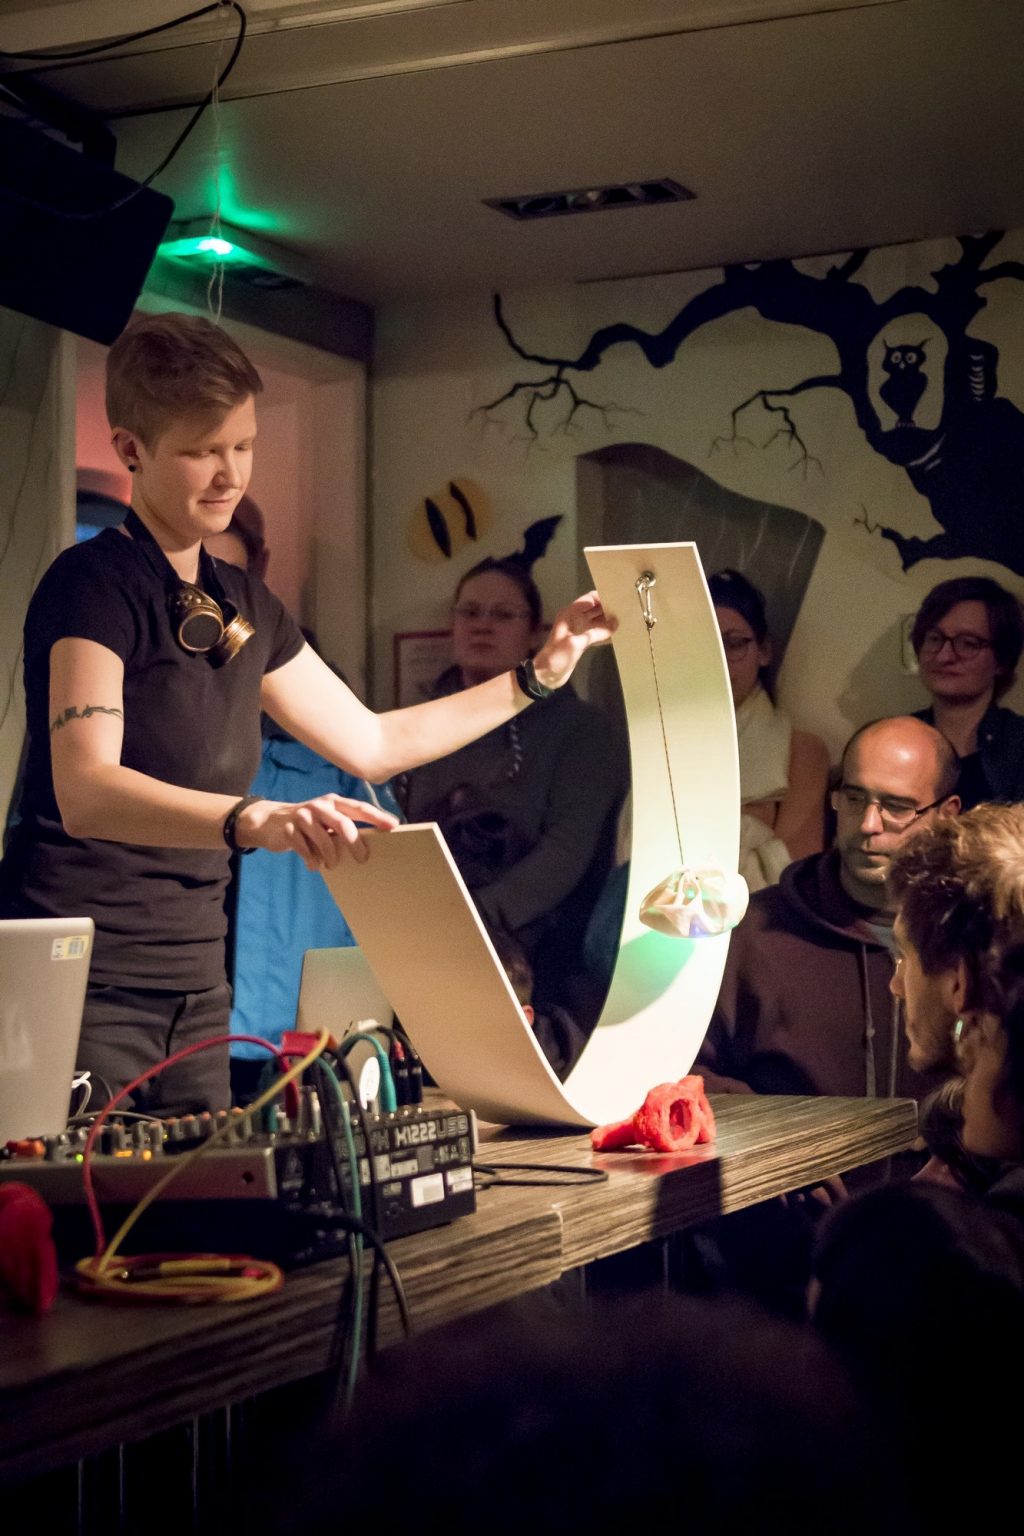 A person (me) holding the wooden curve object on the table in front of the audience.